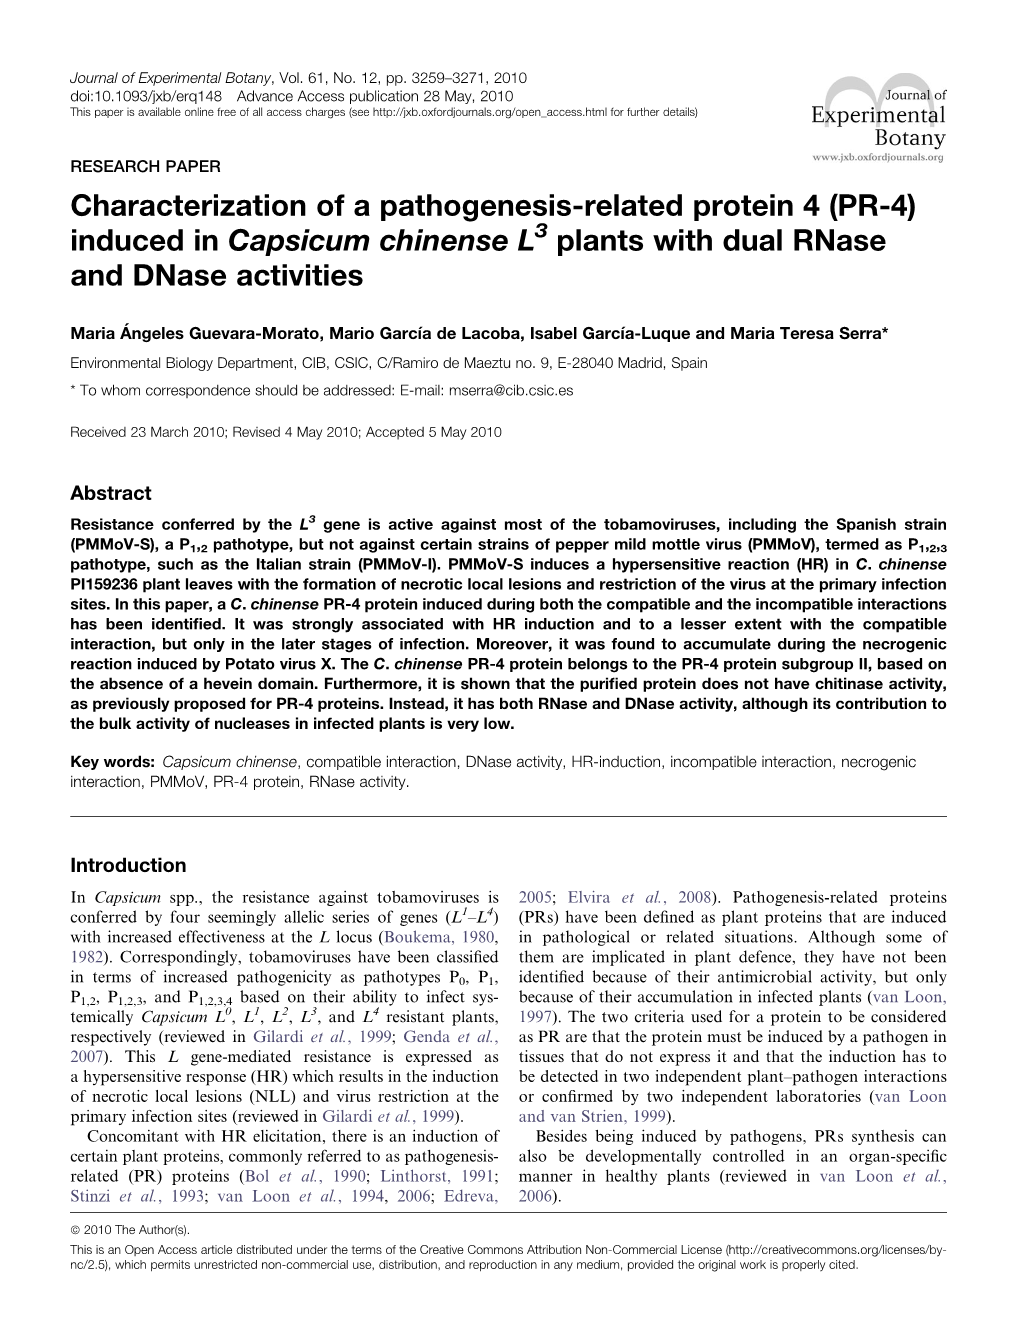 Characterization of a Pathogenesis-Related Protein 4 (PR-4) Induced in Capsicum Chinense L 3 Plants with Dual Rnase and Dnase Activities